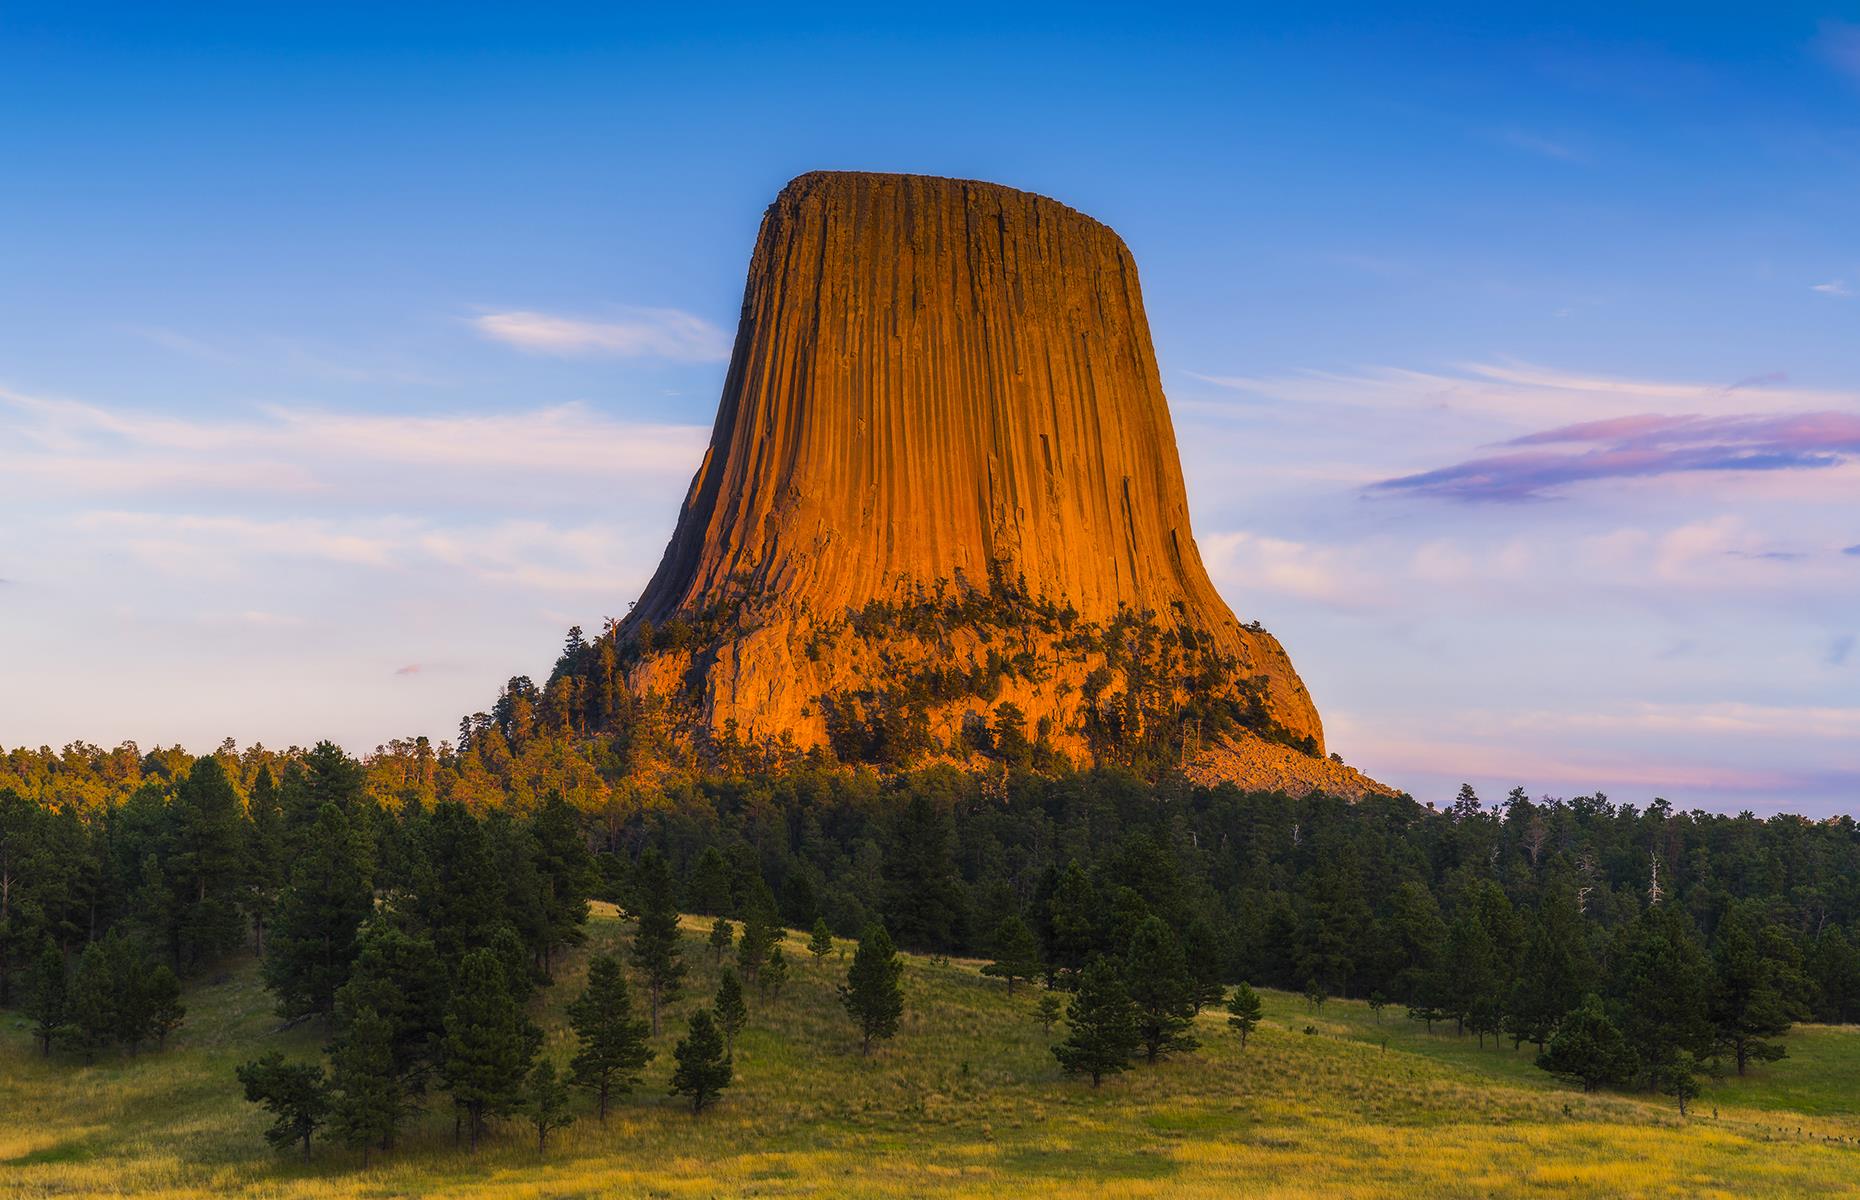 <p>Standing watch over Wyoming’s sprawling northeastern prairies, Devils Tower is a remarkable sight. Sacred to many Indigenous peoples, the geological wonder was formed from molten rock over millions of years and rises some 867 feet from its base to its flat summit – that makes it the largest example of columnar jointing in the world. It became America’s first National Monument way back in 1906.</p>  <p><a href="https://www.loveexploring.com/galleries/94776/99-beautiful-things-we-love-about-america?page=1"><strong>Now take a look at 99 beautiful things we love about America</strong></a></p>